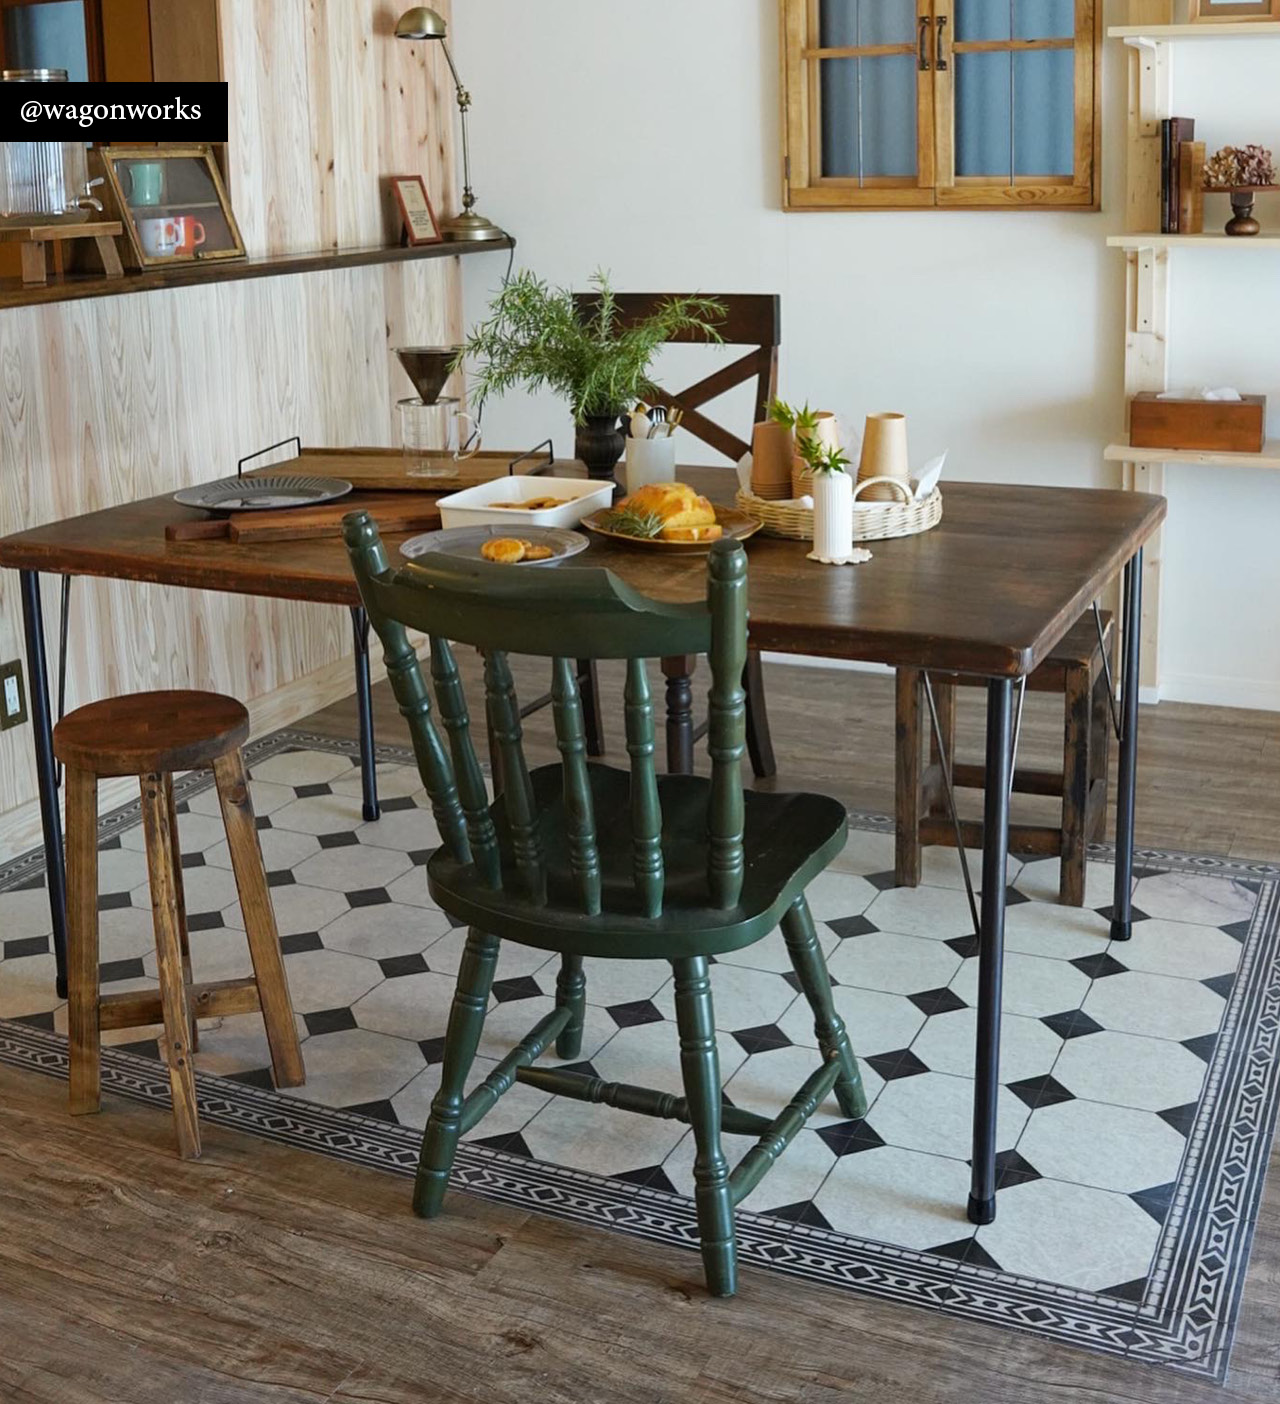 Black and white chessboard-pattern rug under a dining table with a flower vase